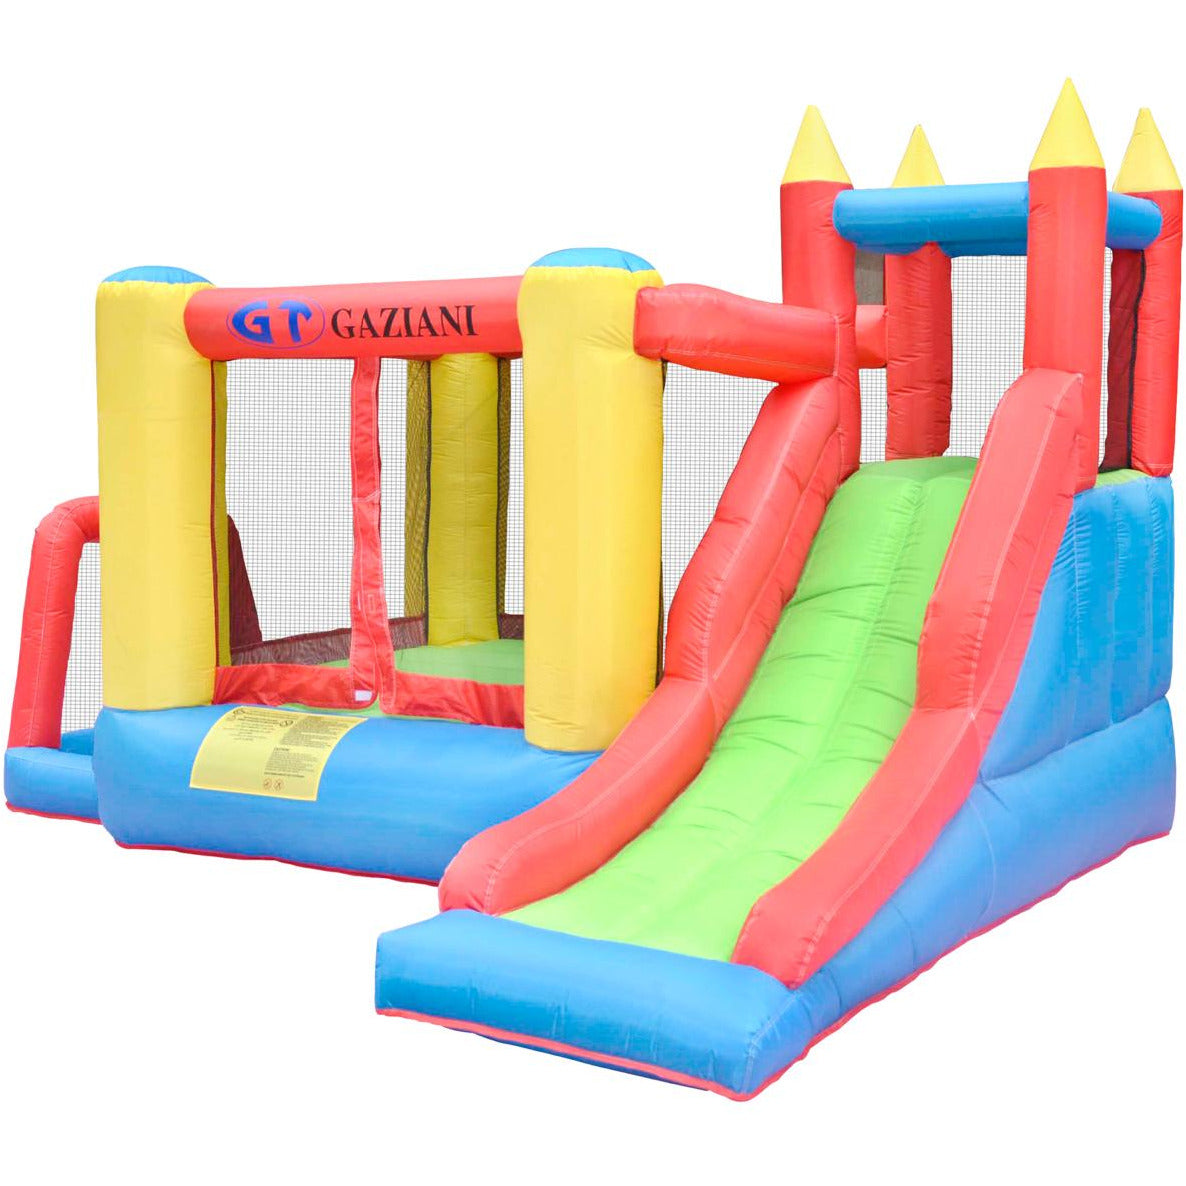 Megastar Inflatable Bouncy Mansion with Multi activities play area including basketball hoop , Ball pit , climb ,slide& Hide. - MGA STAR MARKETING 